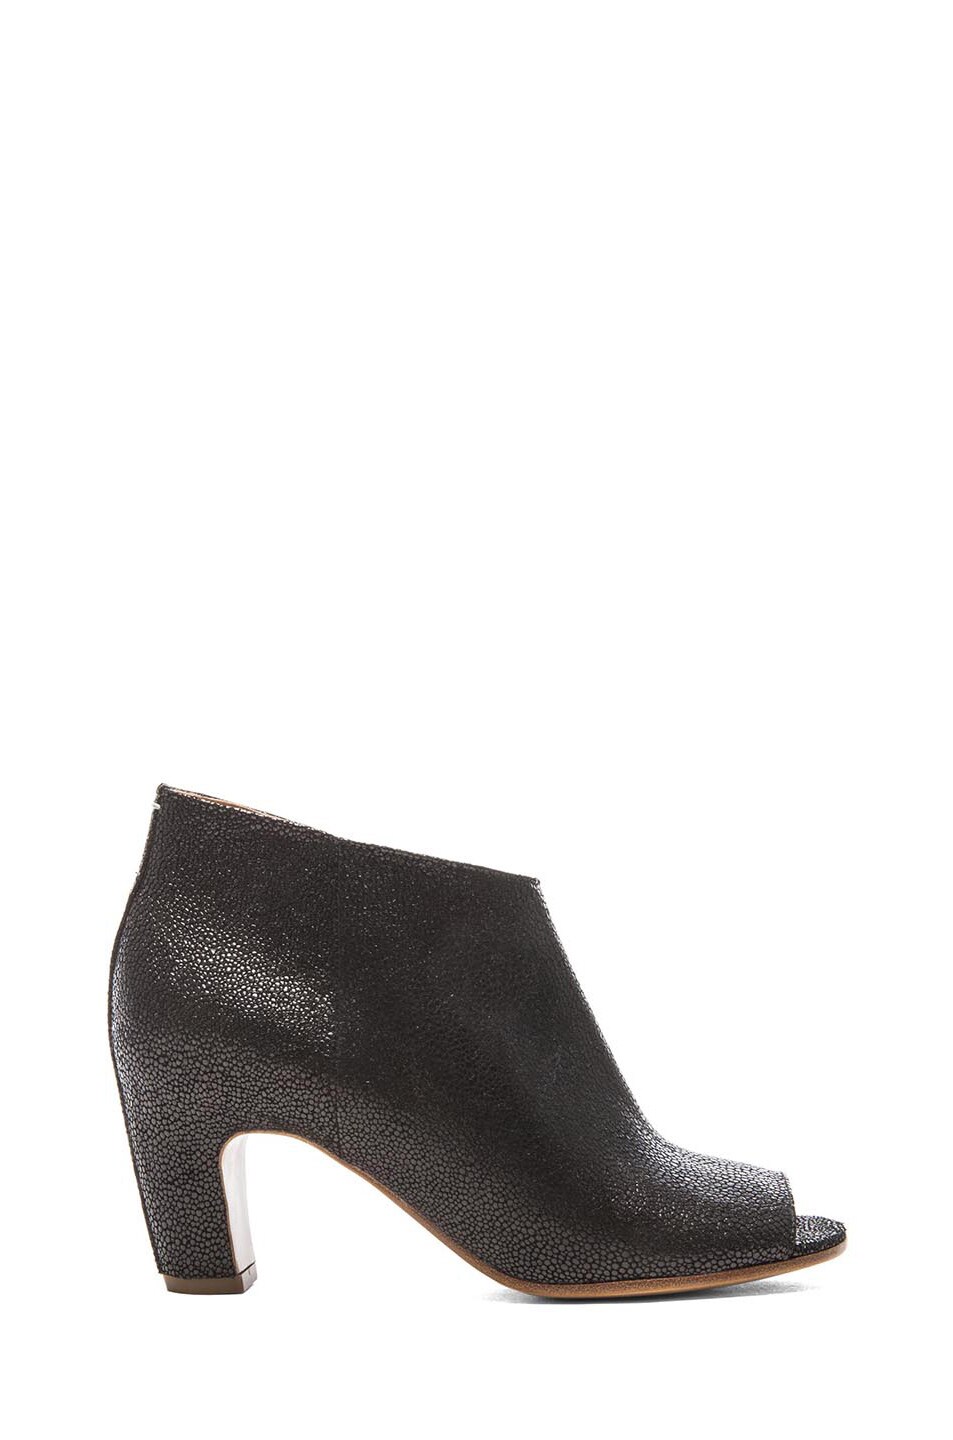 Image 1 of Maison Margiela Stingray Embossed Leather Booties in Black